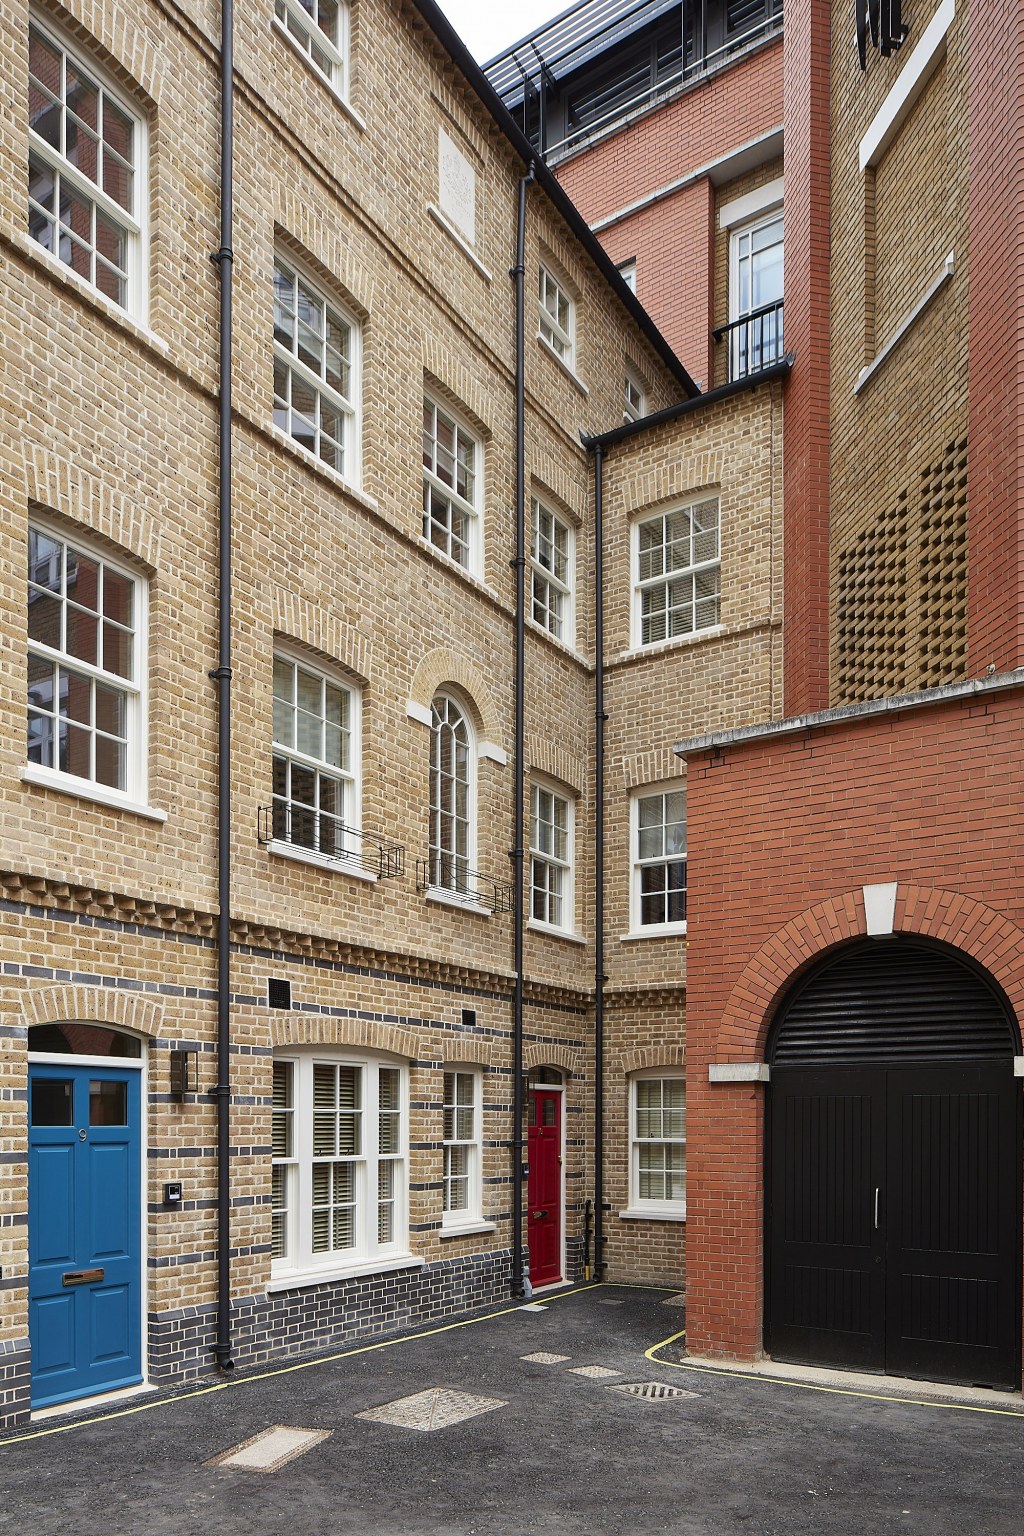 Replacement homes on Dean's Mews, London / London family homes